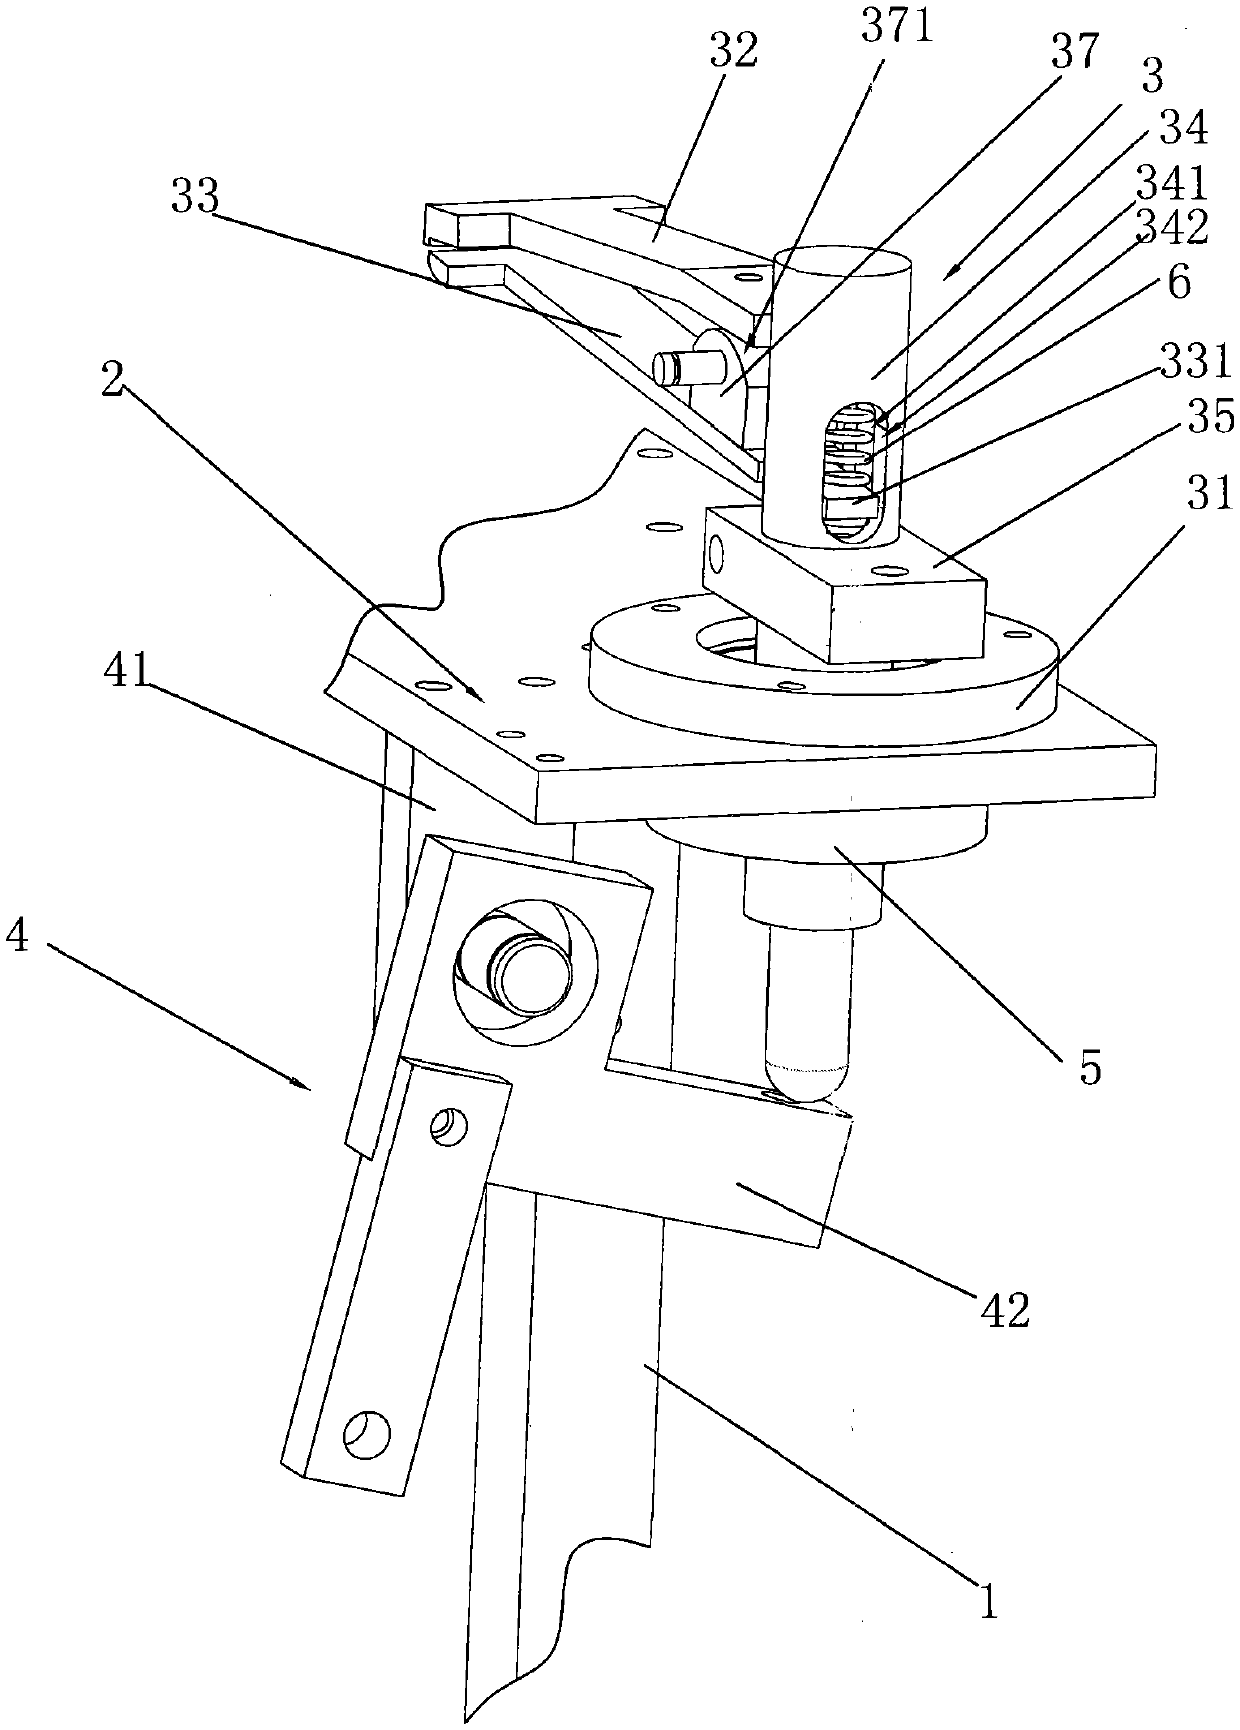 An holding device of a packaging machine origami device